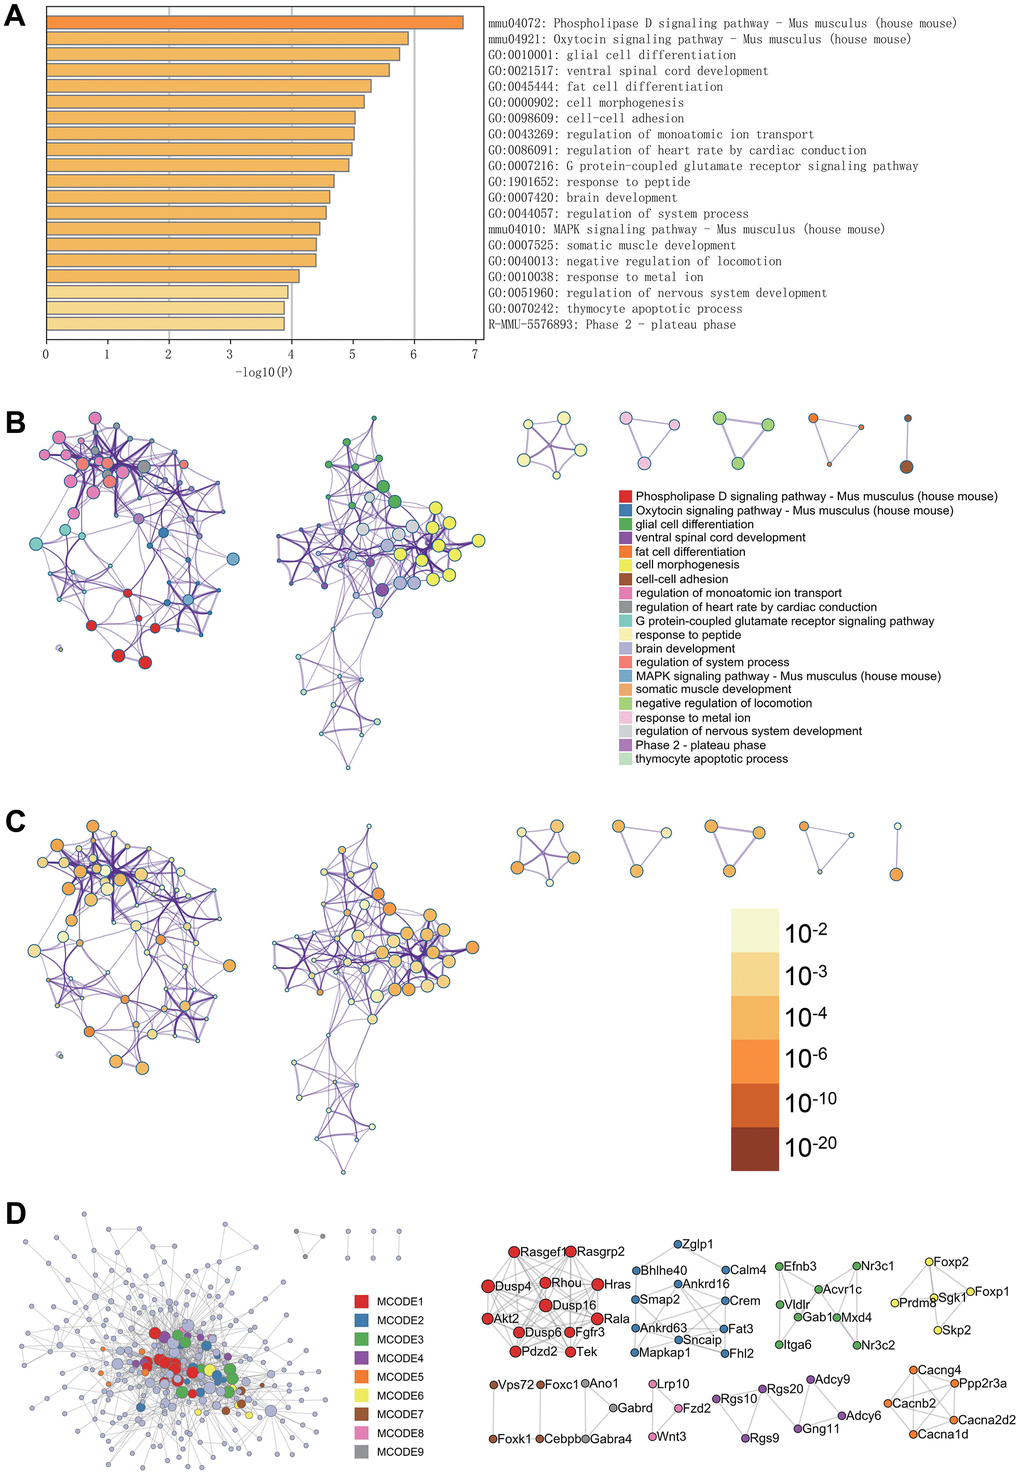 Metascape enrichment analysis. (A) Bar graph of enriched terms across input gene lists, colored by p-values. (B) Network of enriched terms: colored by cluster ID, where nodes that share the same cluster ID are typically close to each other. (C) colored by p-value, where terms containing more genes tend to have a more significant p-value. (D) Protein-protein interaction network. MCODE components identified in the gene lists.